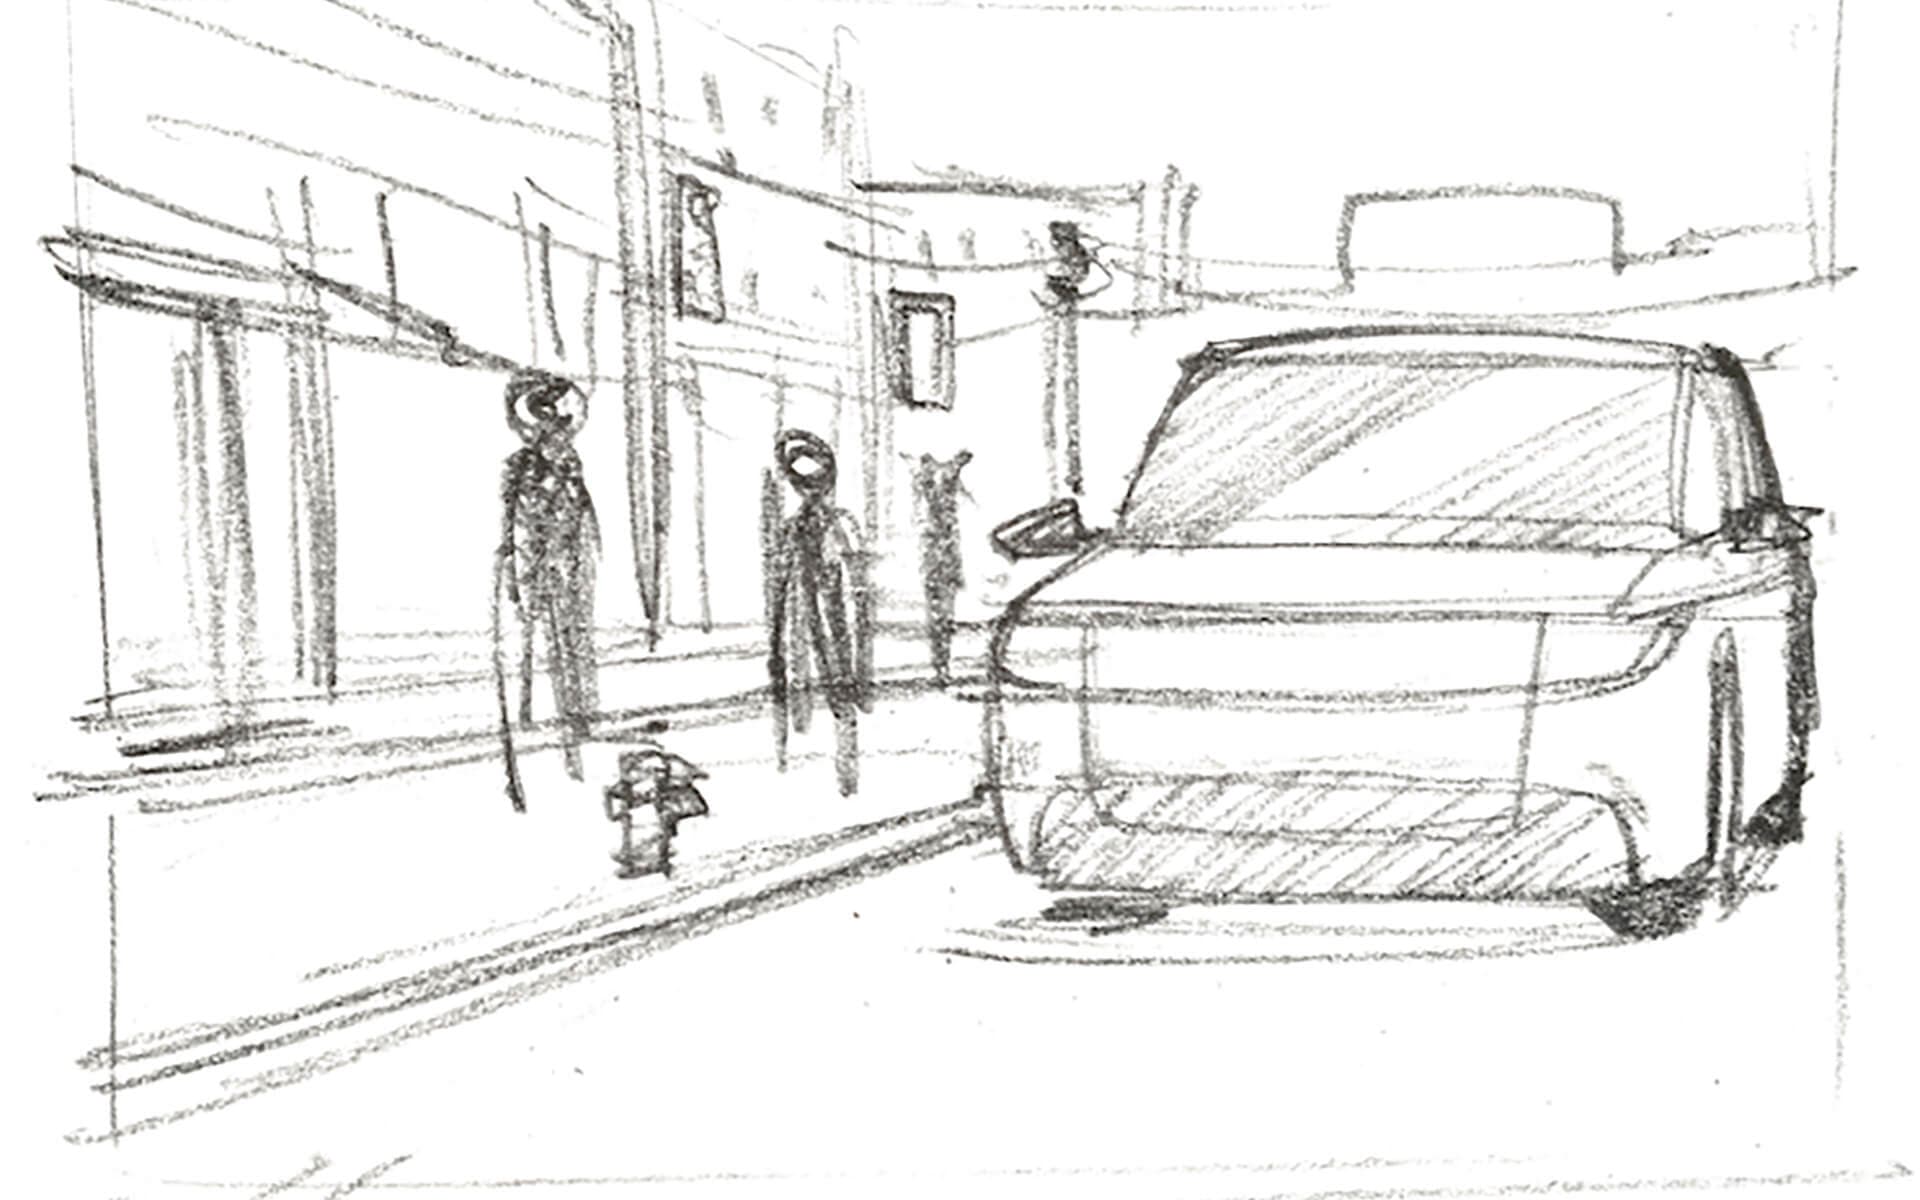 Sketch of car pulling up to a curb to pick someone up